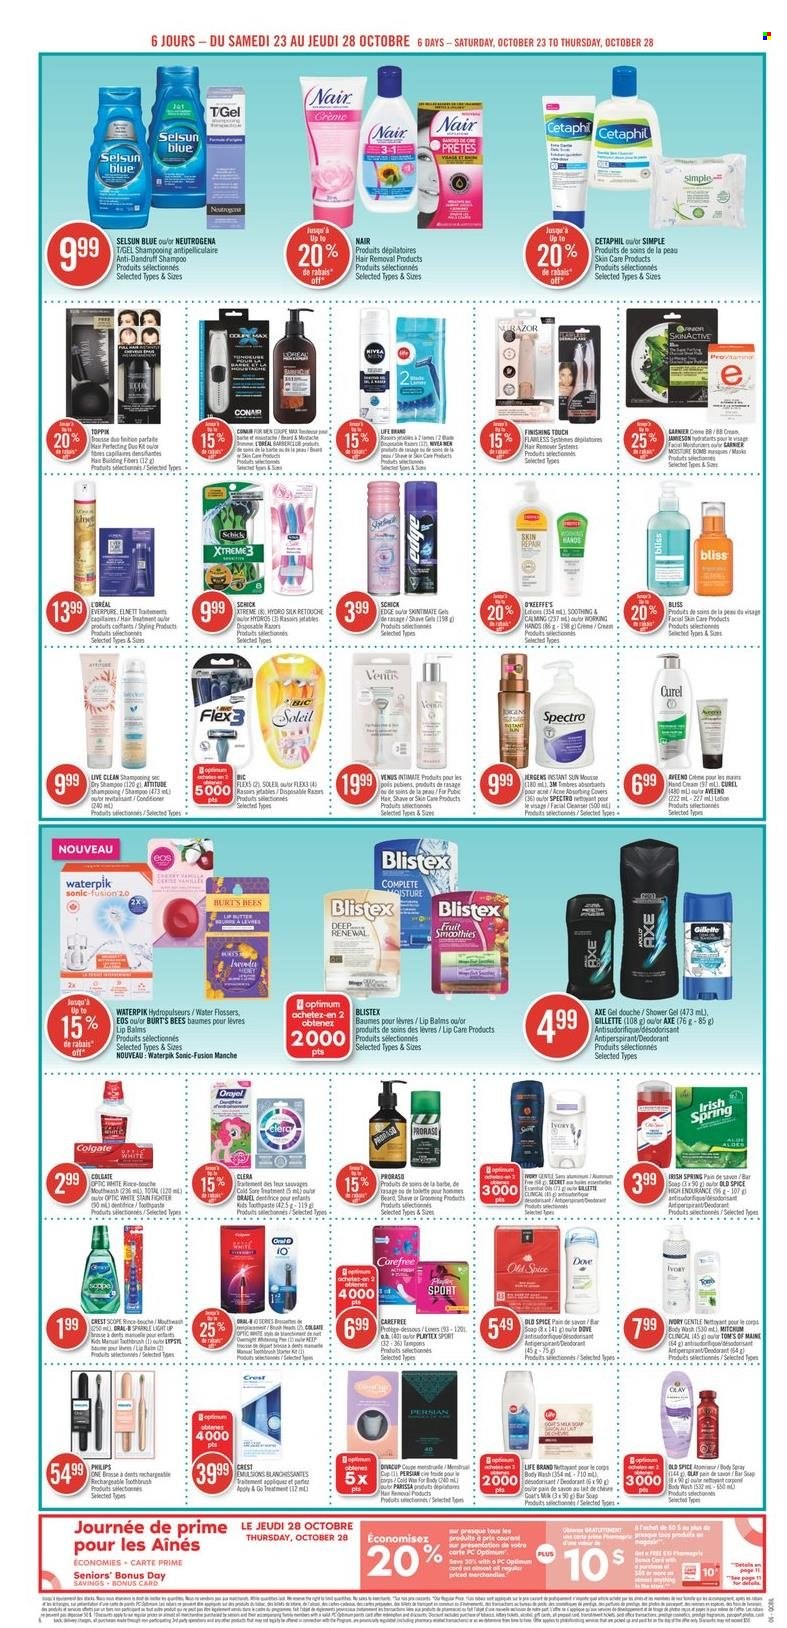 thumbnail - Pharmaprix Flyer - October 23, 2021 - October 28, 2021 - Sales products - Philips, Ace, Silk, spice, smoothie, Jameson, Aveeno, shower gel, soap bar, soap, Crest, Carefree, Curél, conditioner, Toppik, body lotion, Jergens, anti-perspirant, Schick, Venus, hair removal, pan, pen, mouse, Dove, Colgate, Garnier, Gillette, Neutrogena, Old Spice, deodorant. Page 8.